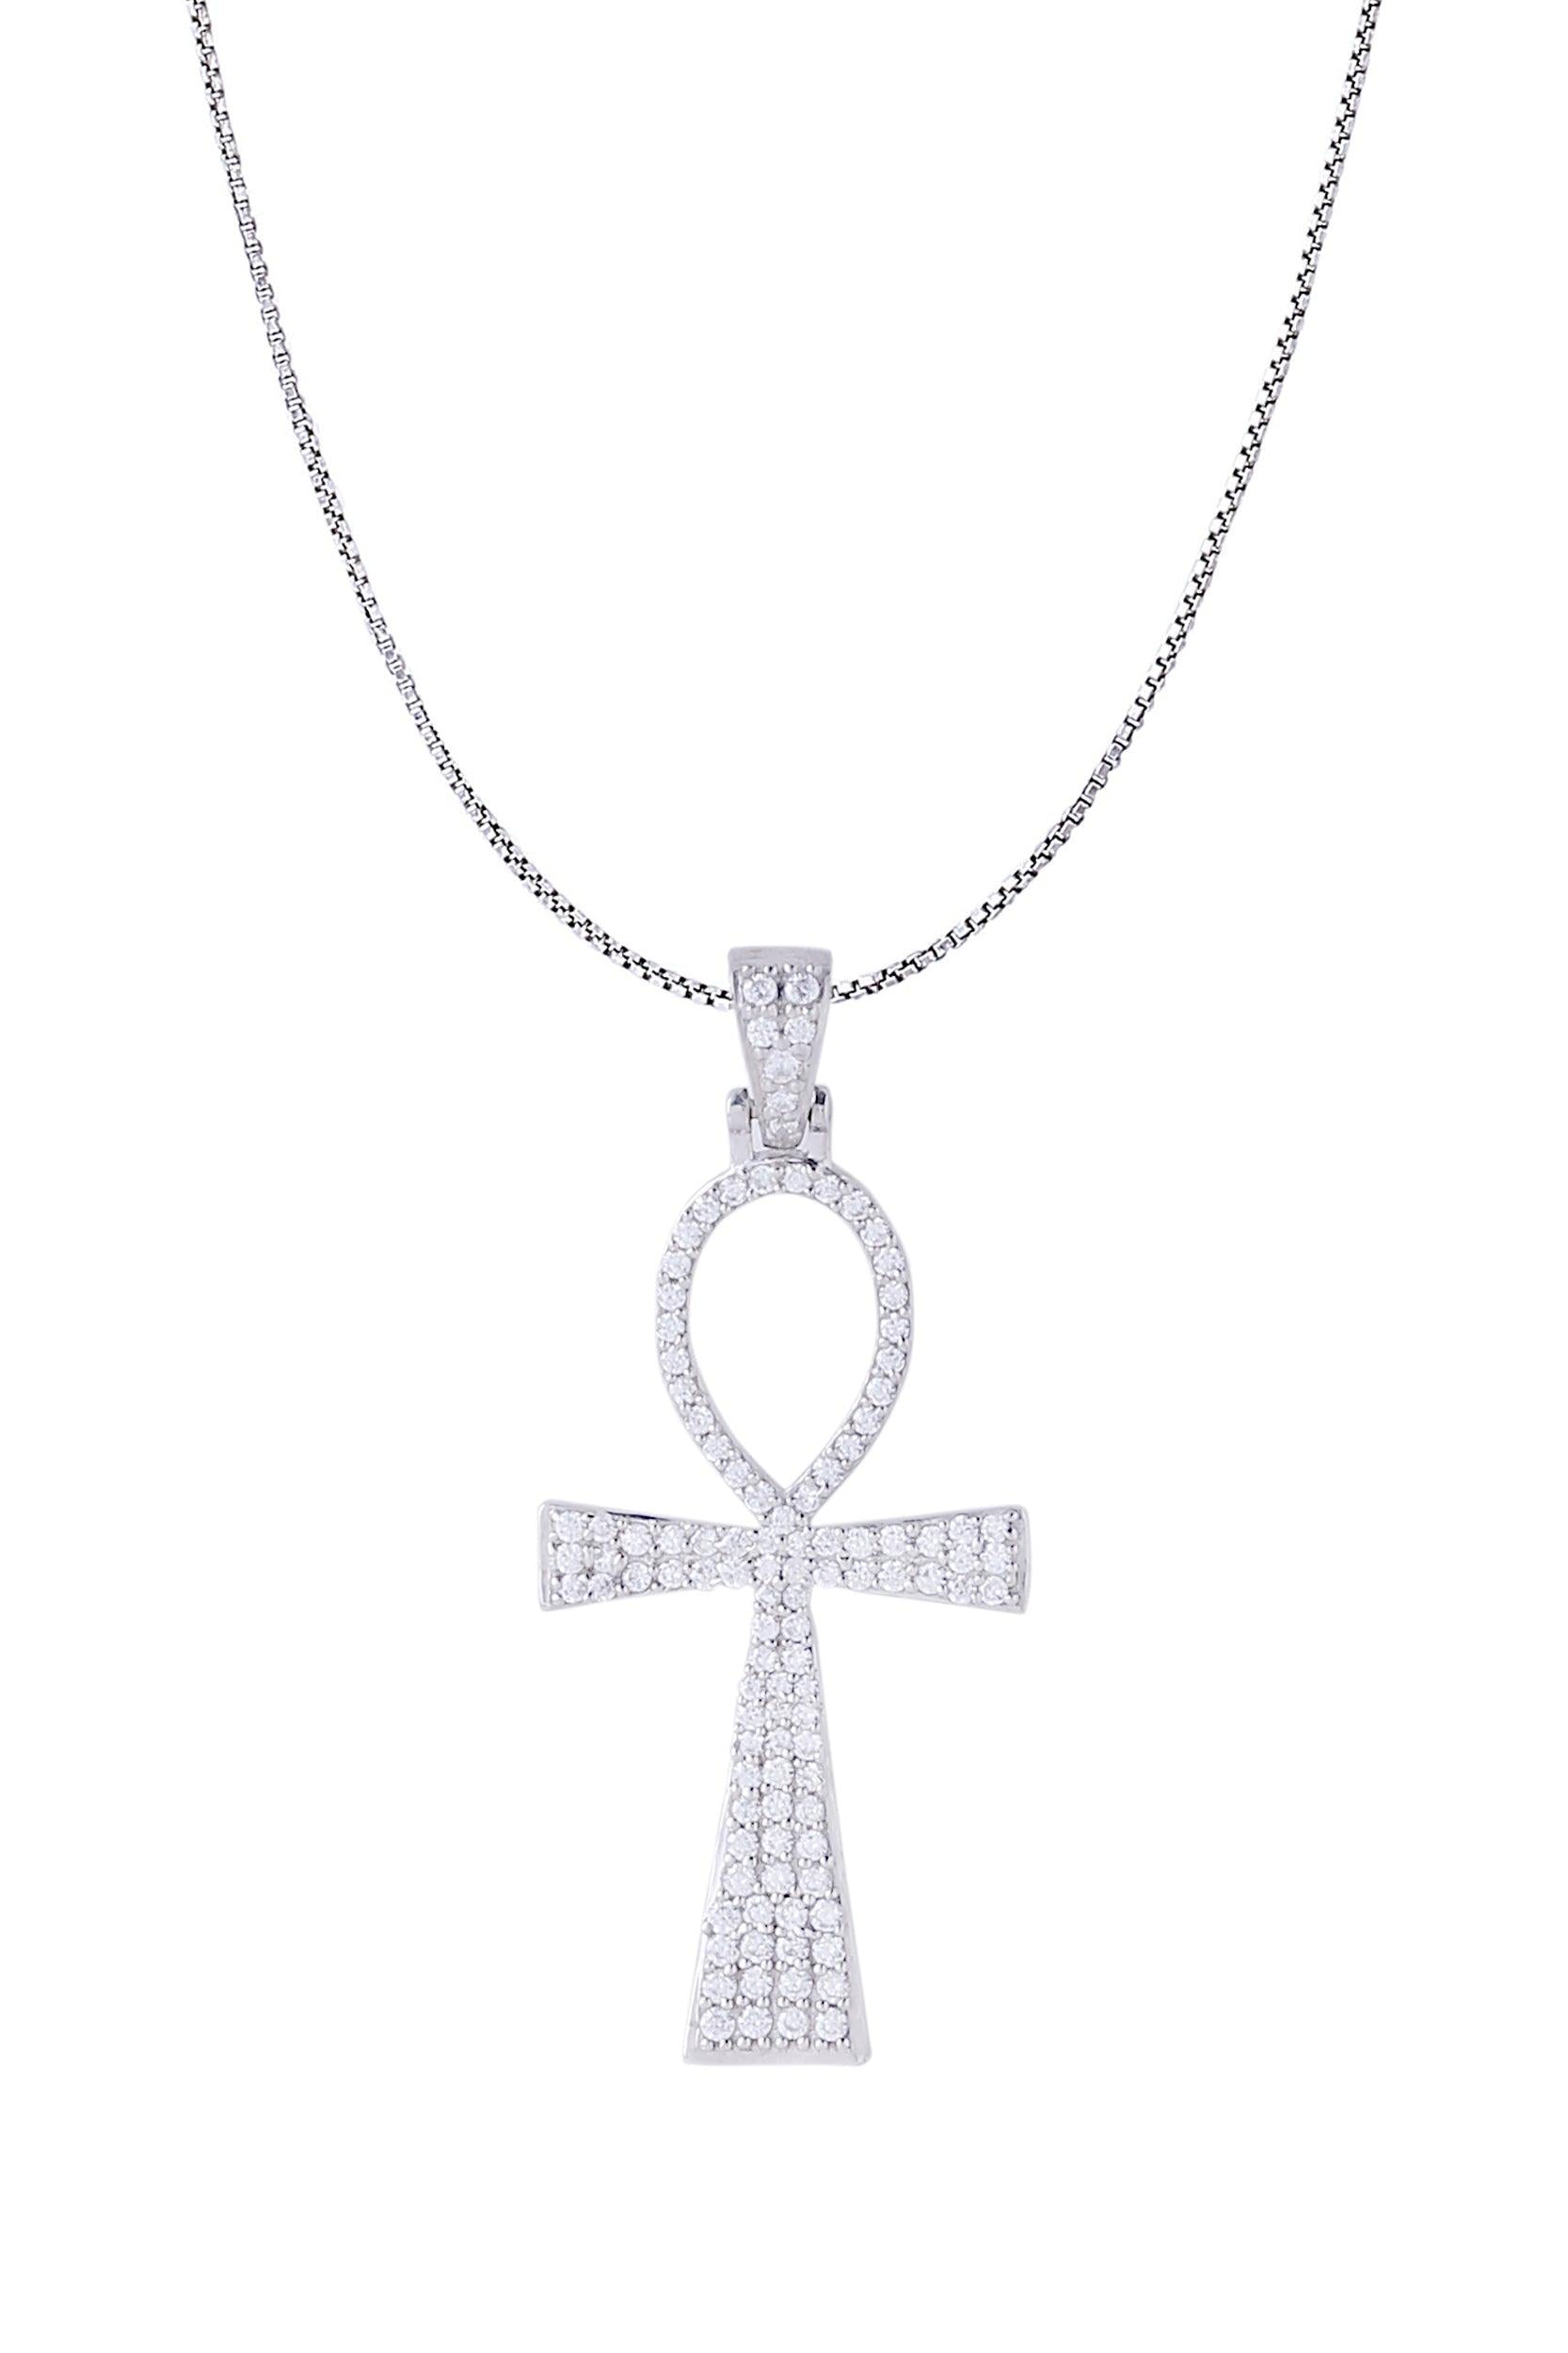 Ankh Cross is a White Gold Color Pendant Made of 925 Sterling Silver with 20 Inch Long Silver Chain